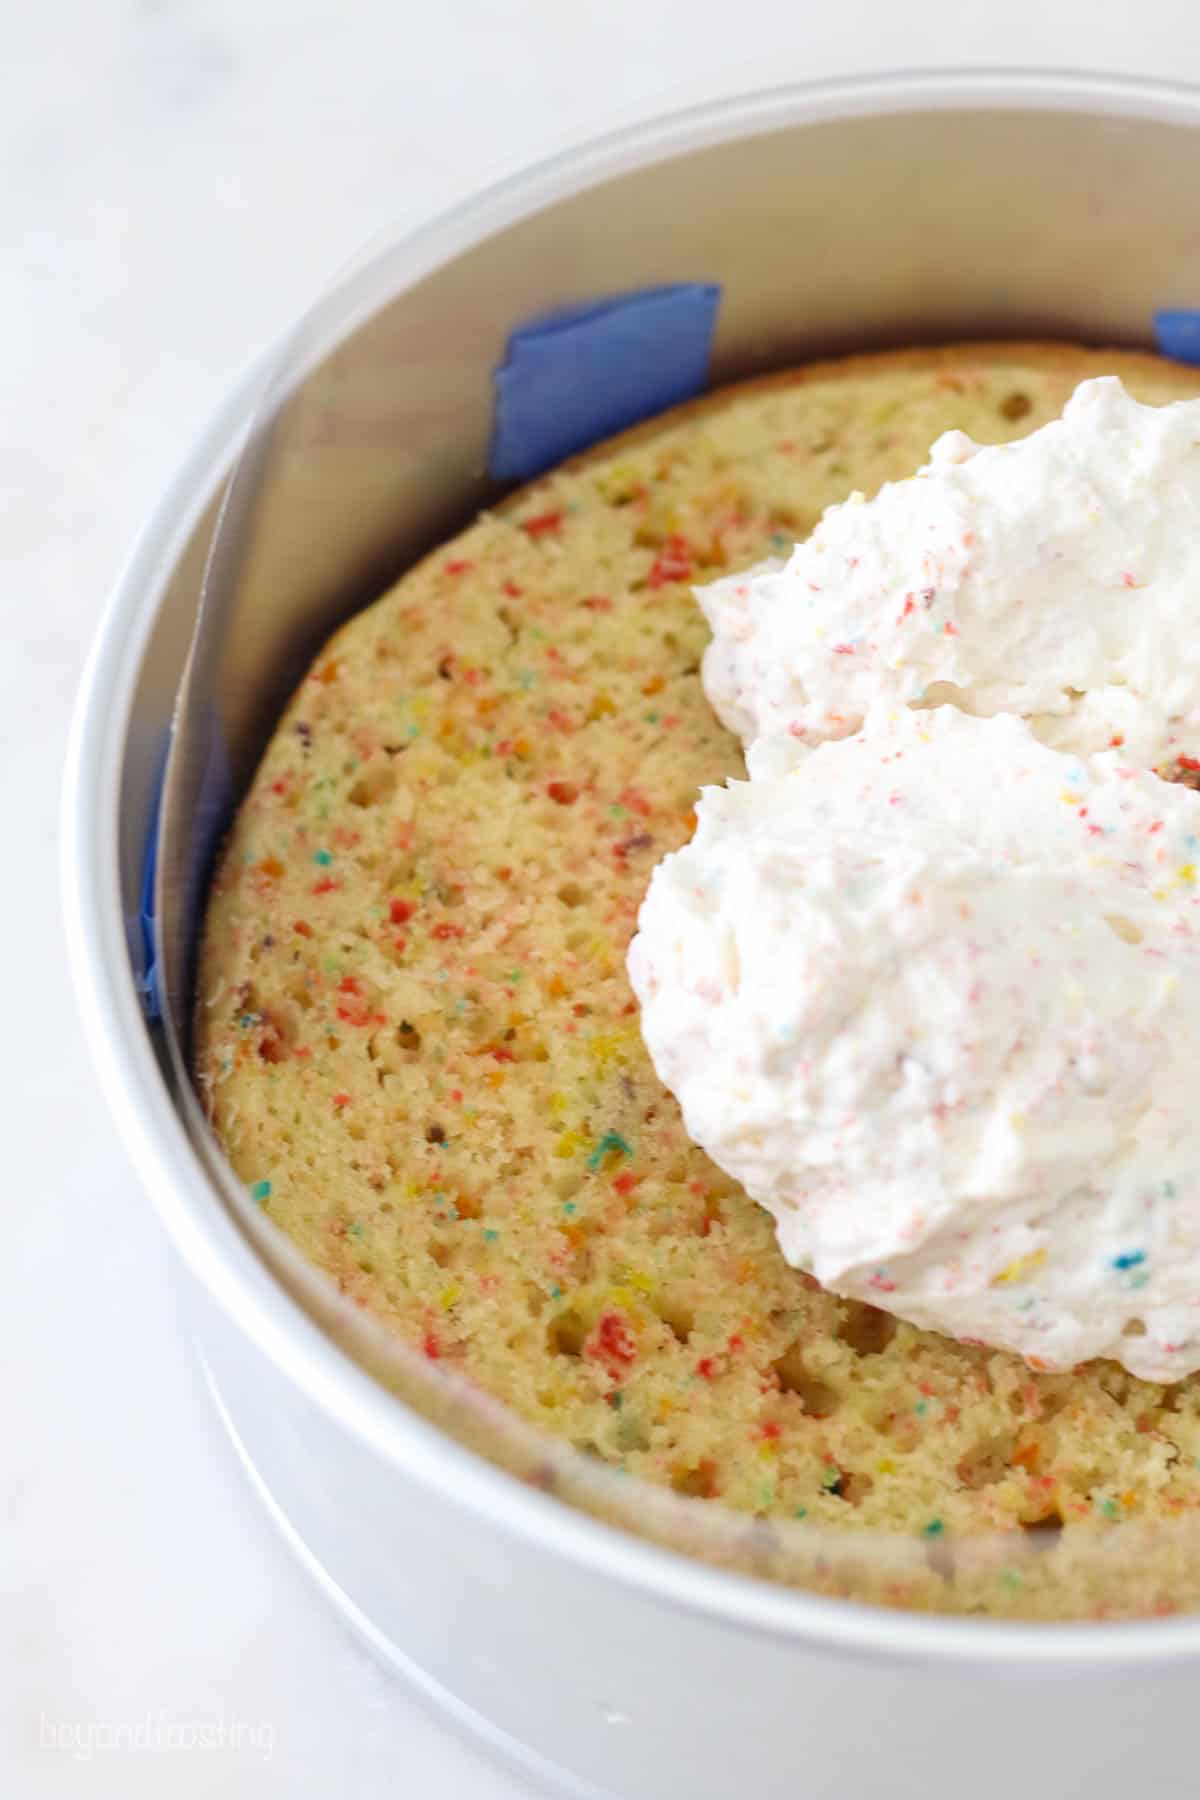 Fruity pebble ice cream beings spread on a cake